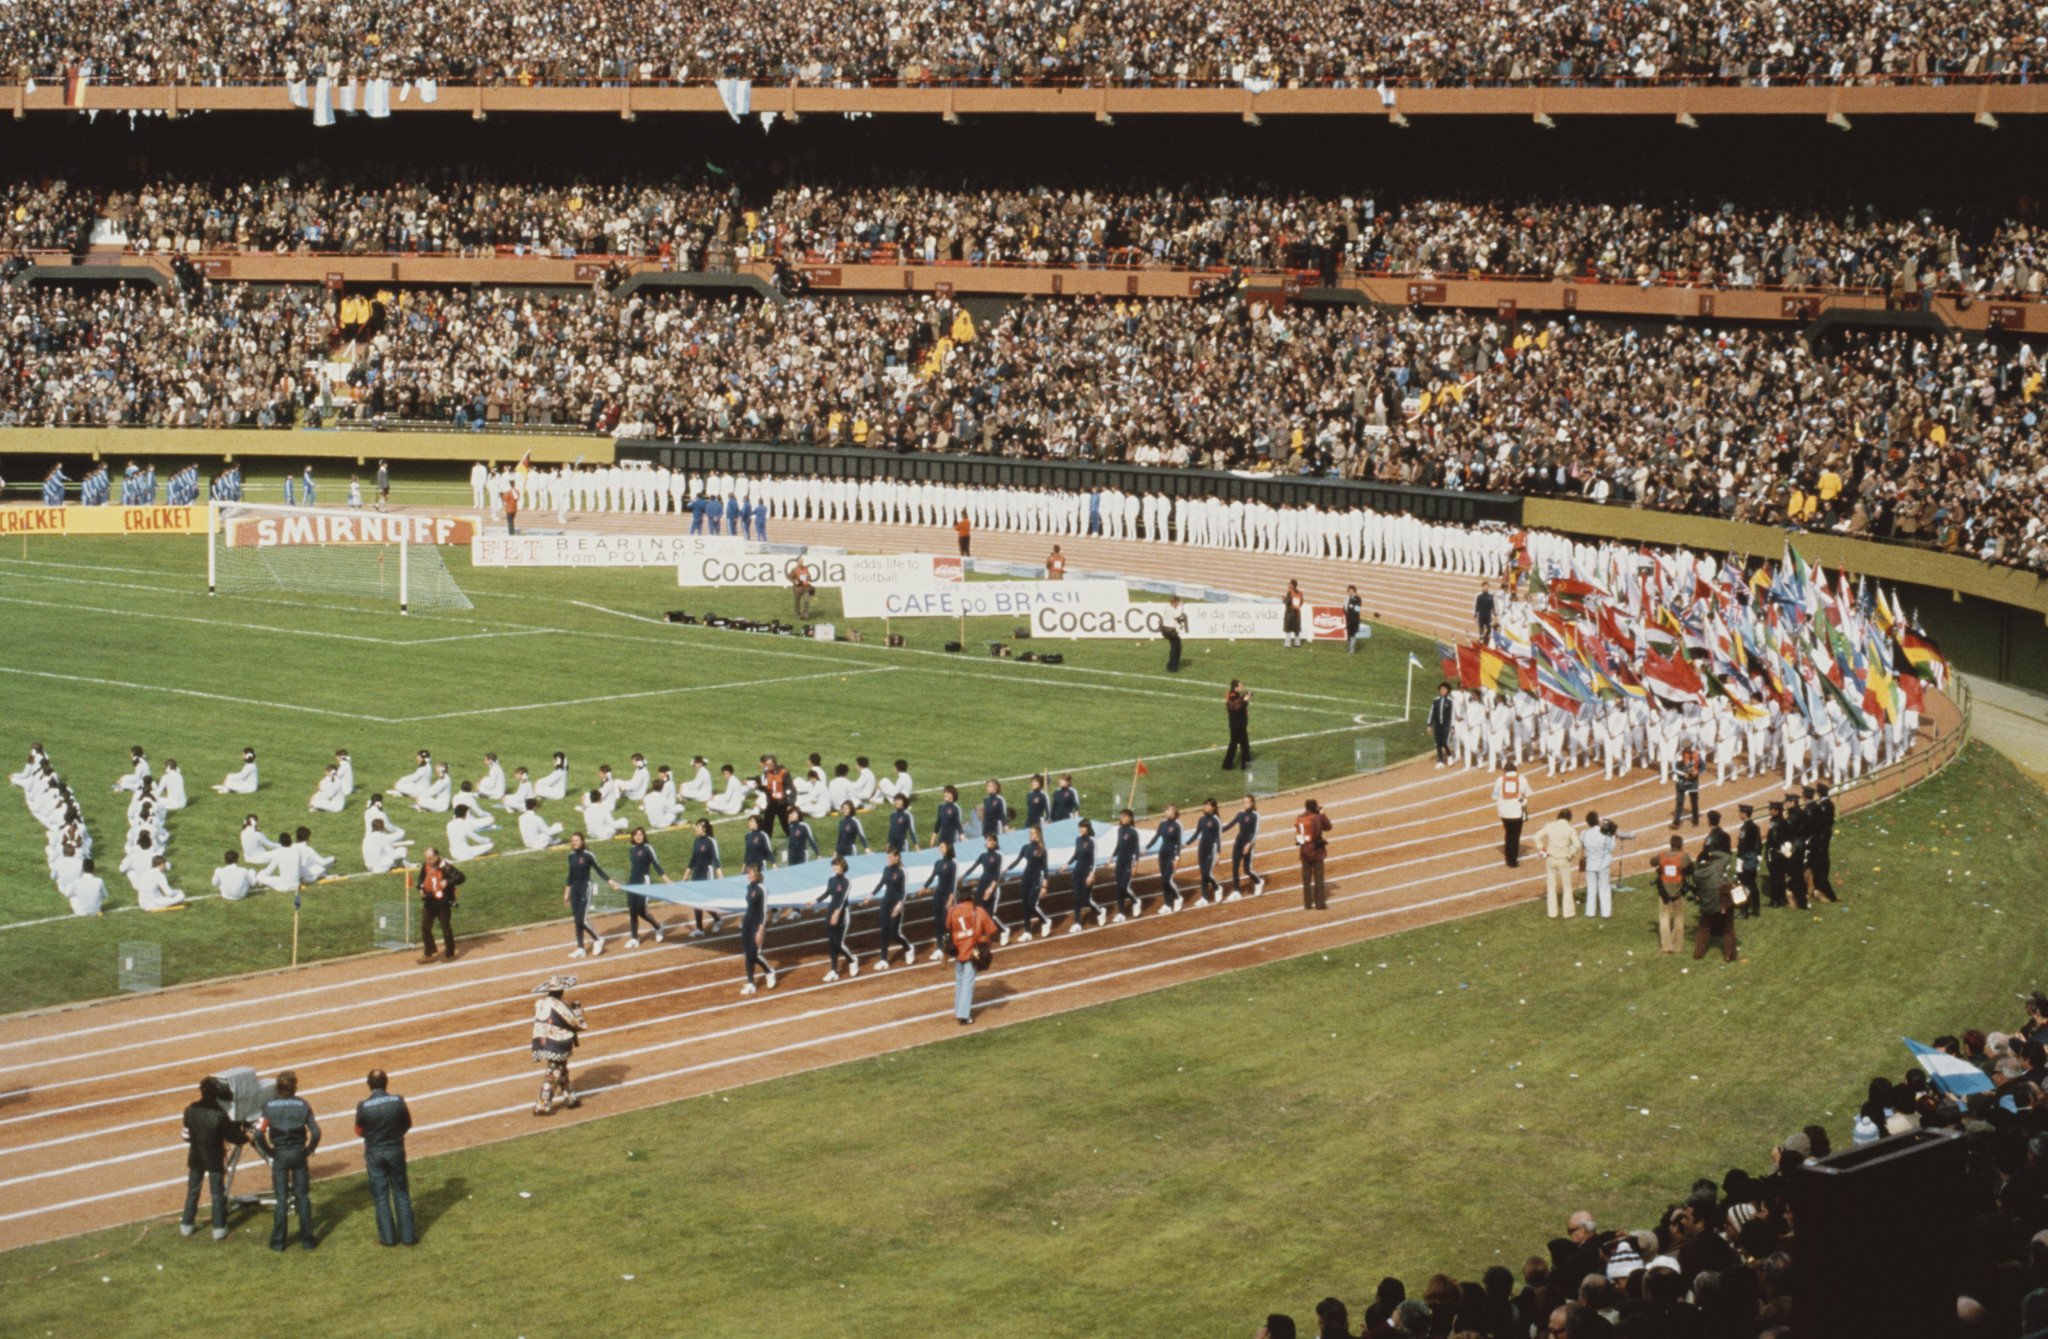 The 1978 World Cup Opening Ceremony featured hundreds of young people but Argentina's military junta were accused of 